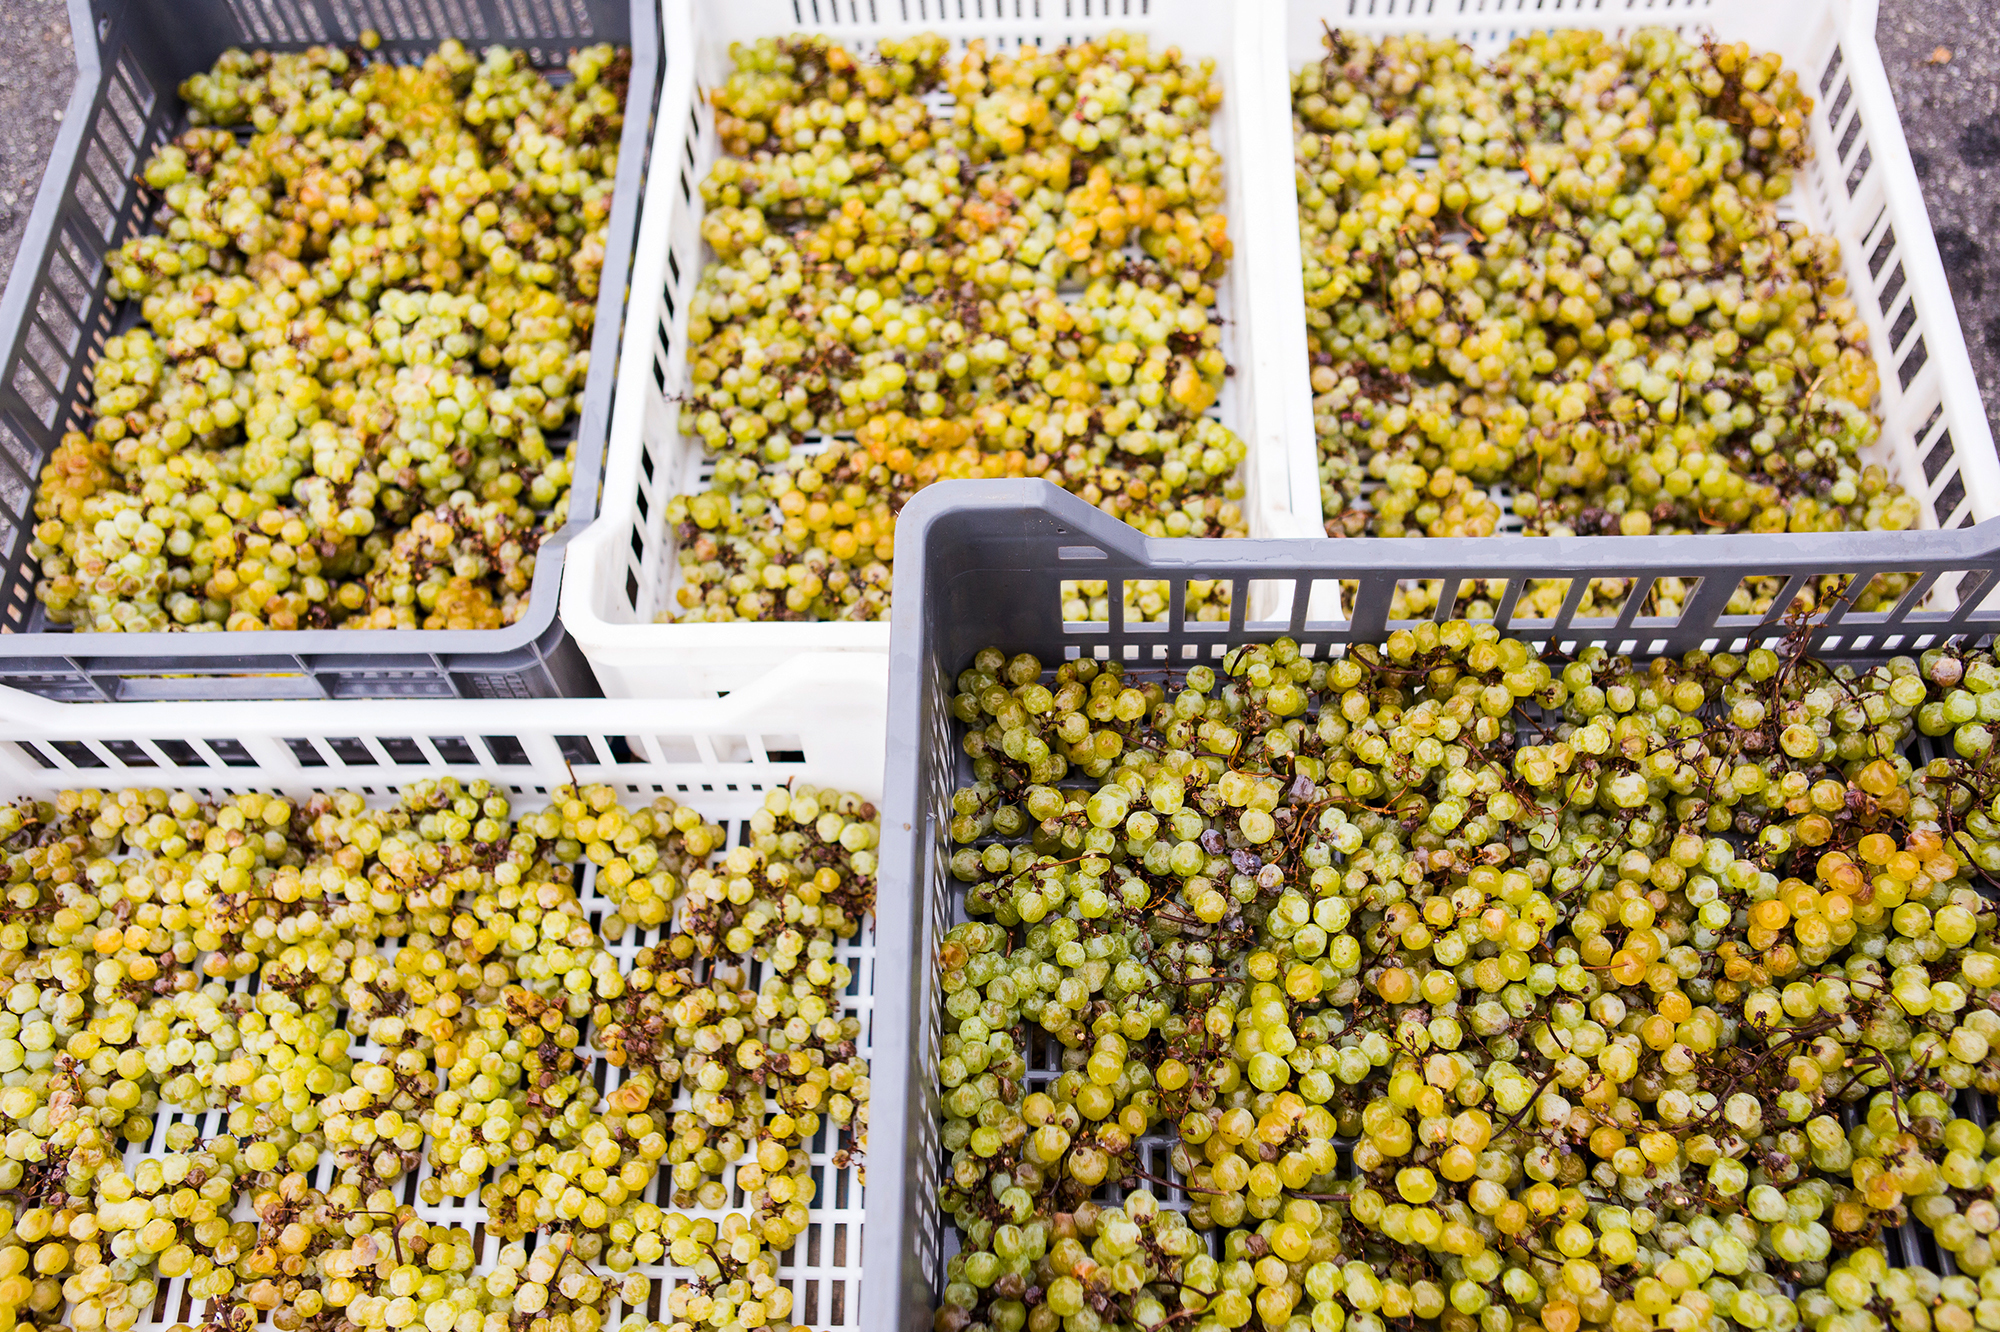 Grapes are gathered and sorted by hand for processing at Barboursville Vineyards in Virginia.